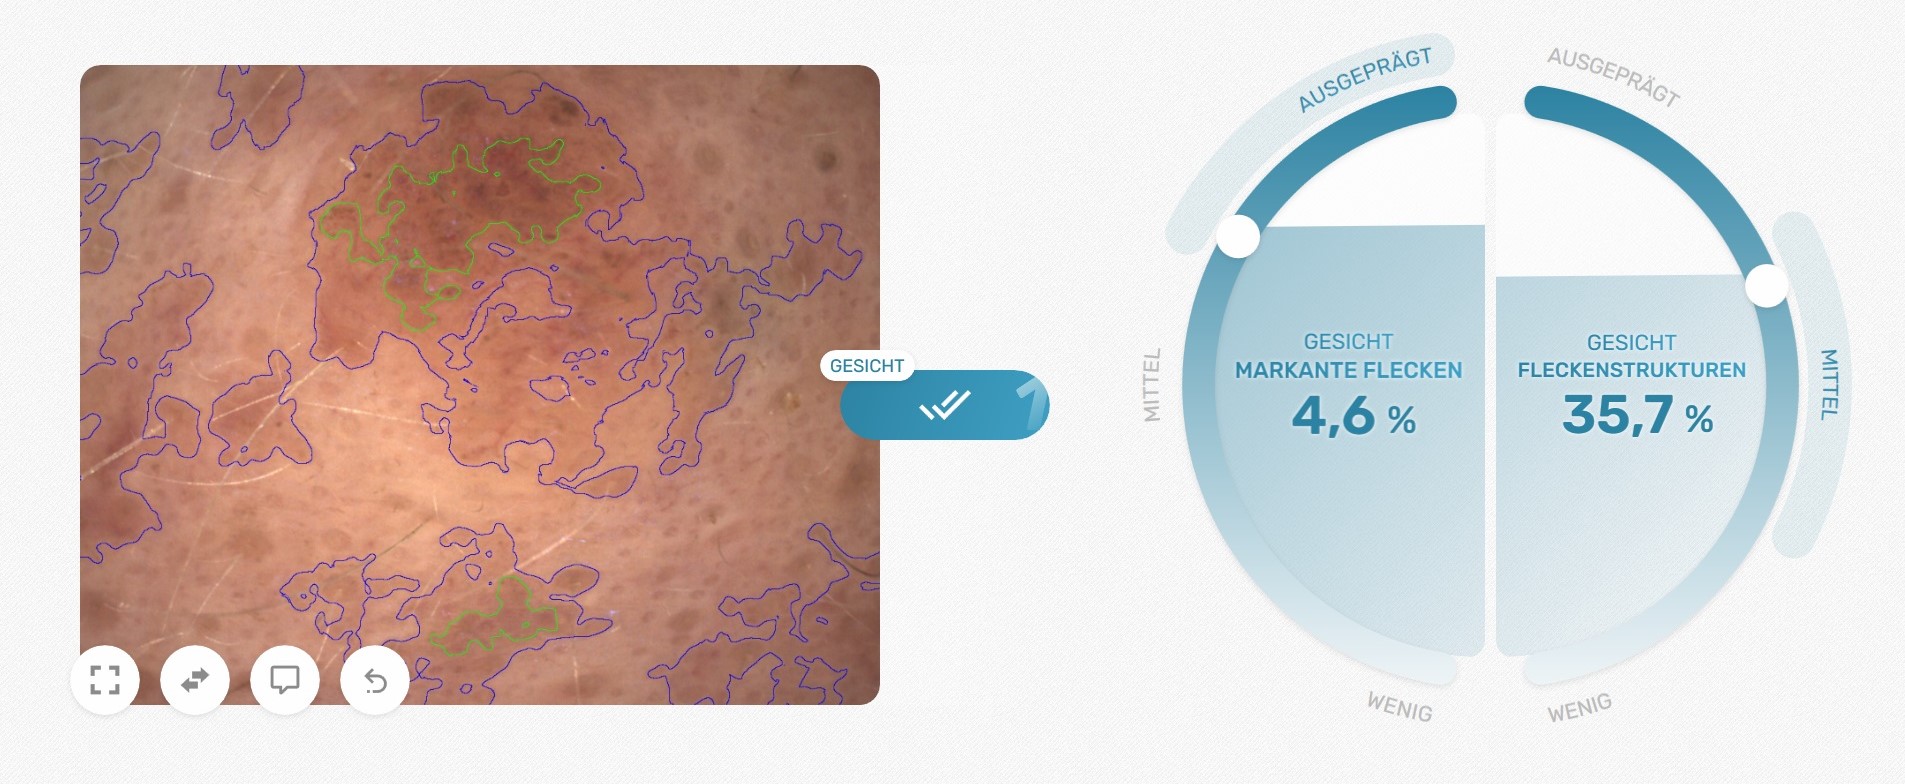 Visioscope®: detection of distinct spots and complex spot structures